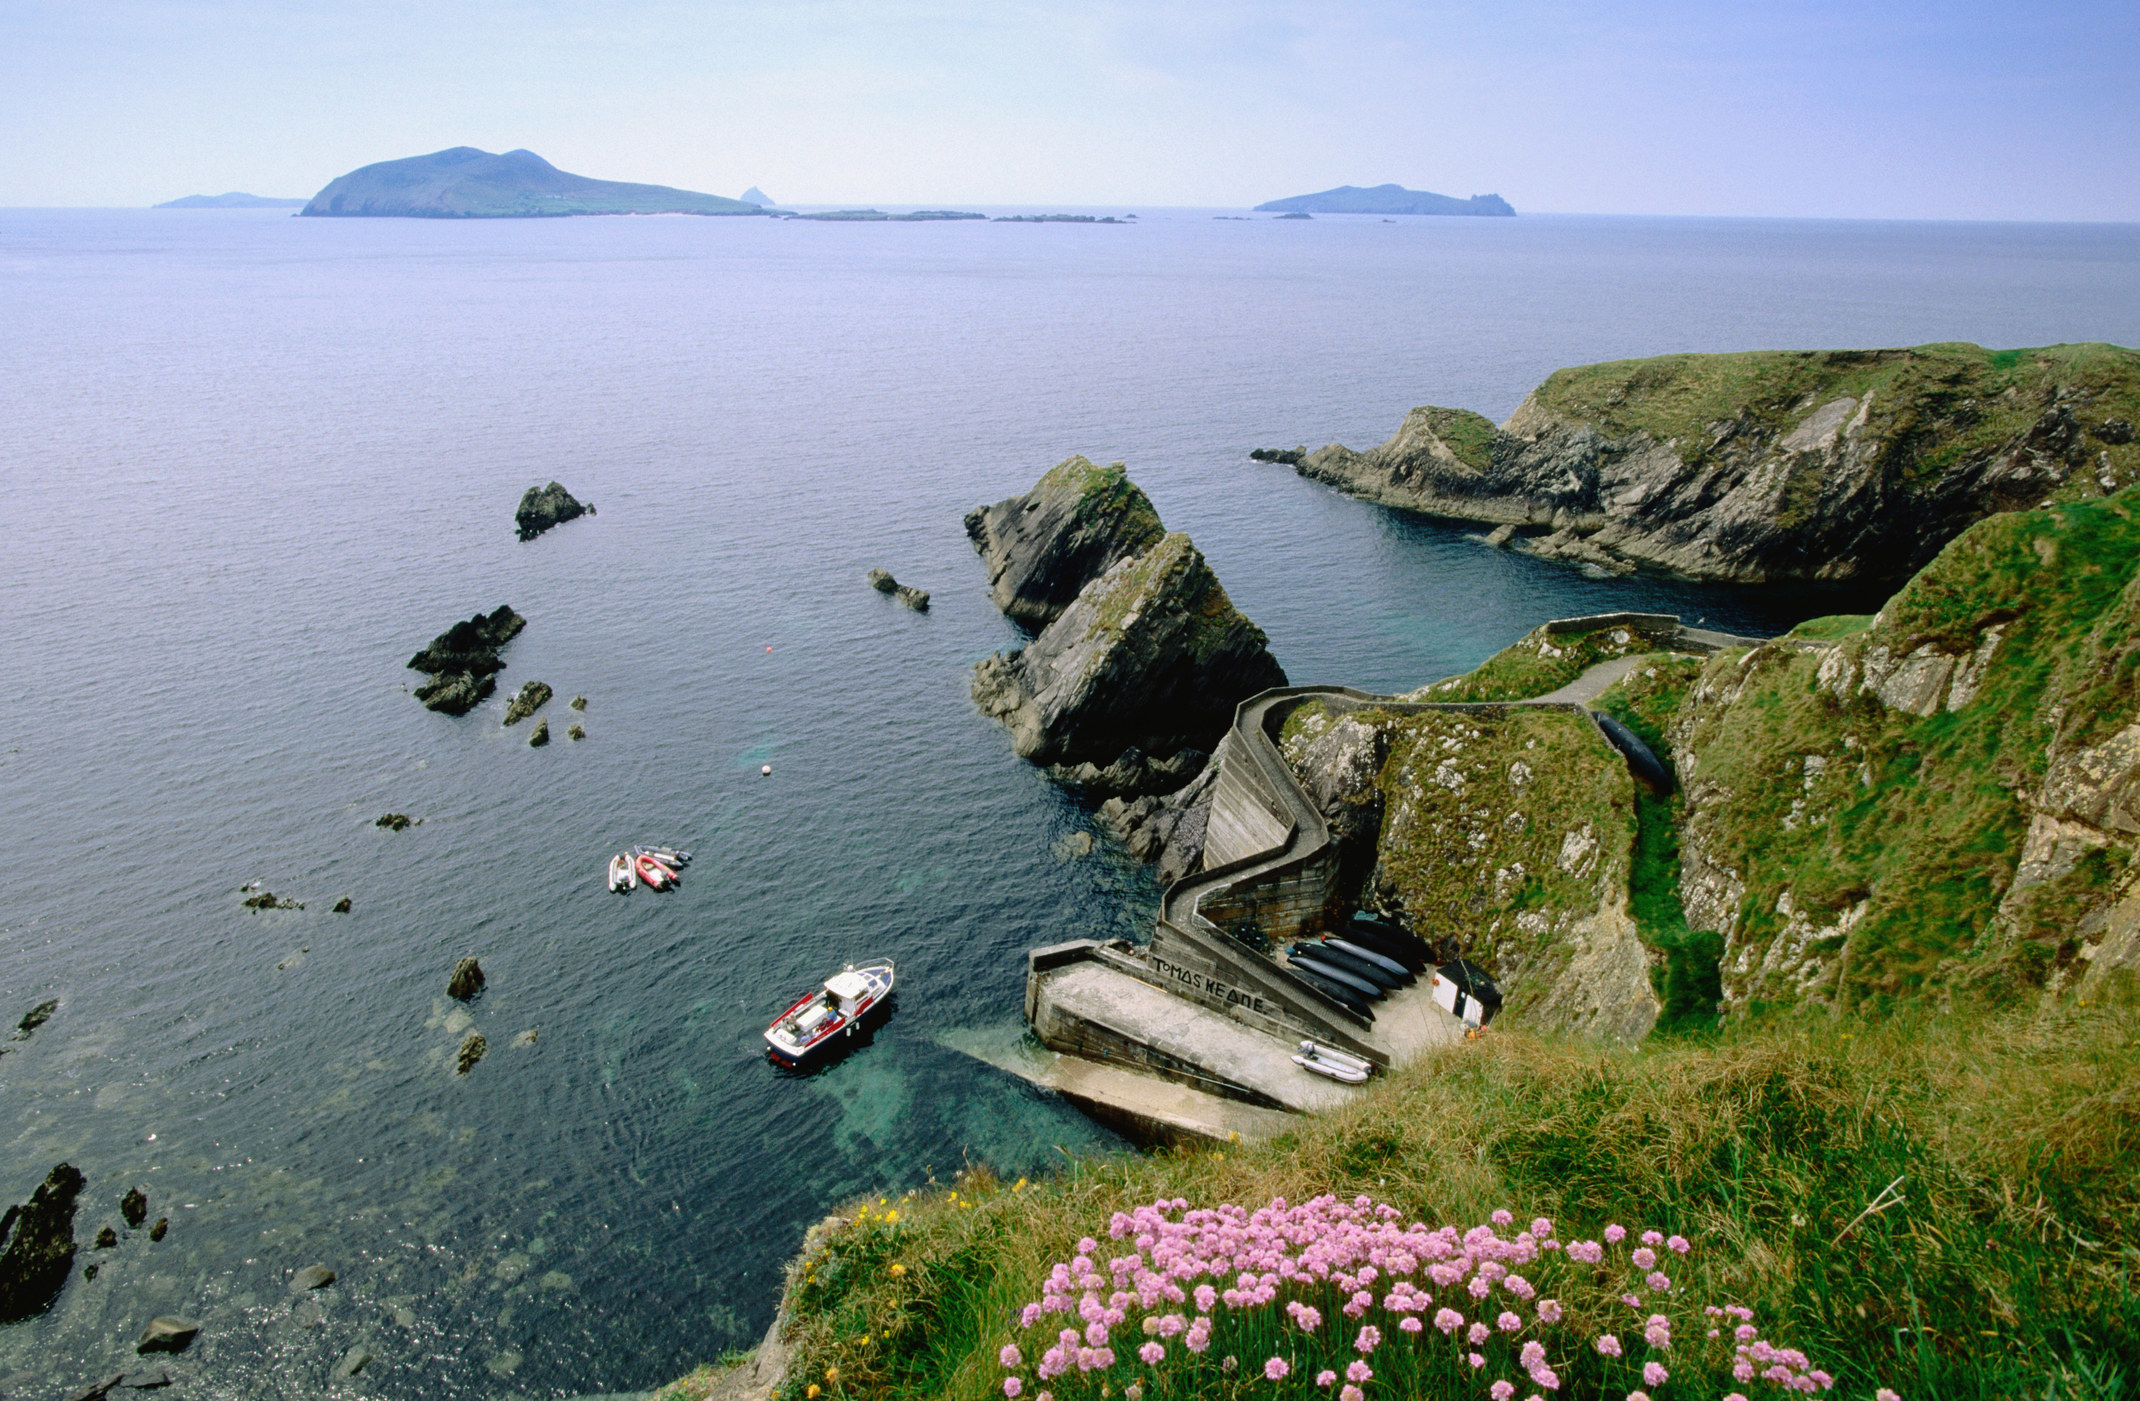 Cliffs over a harbor in the Dingle Peninsula.